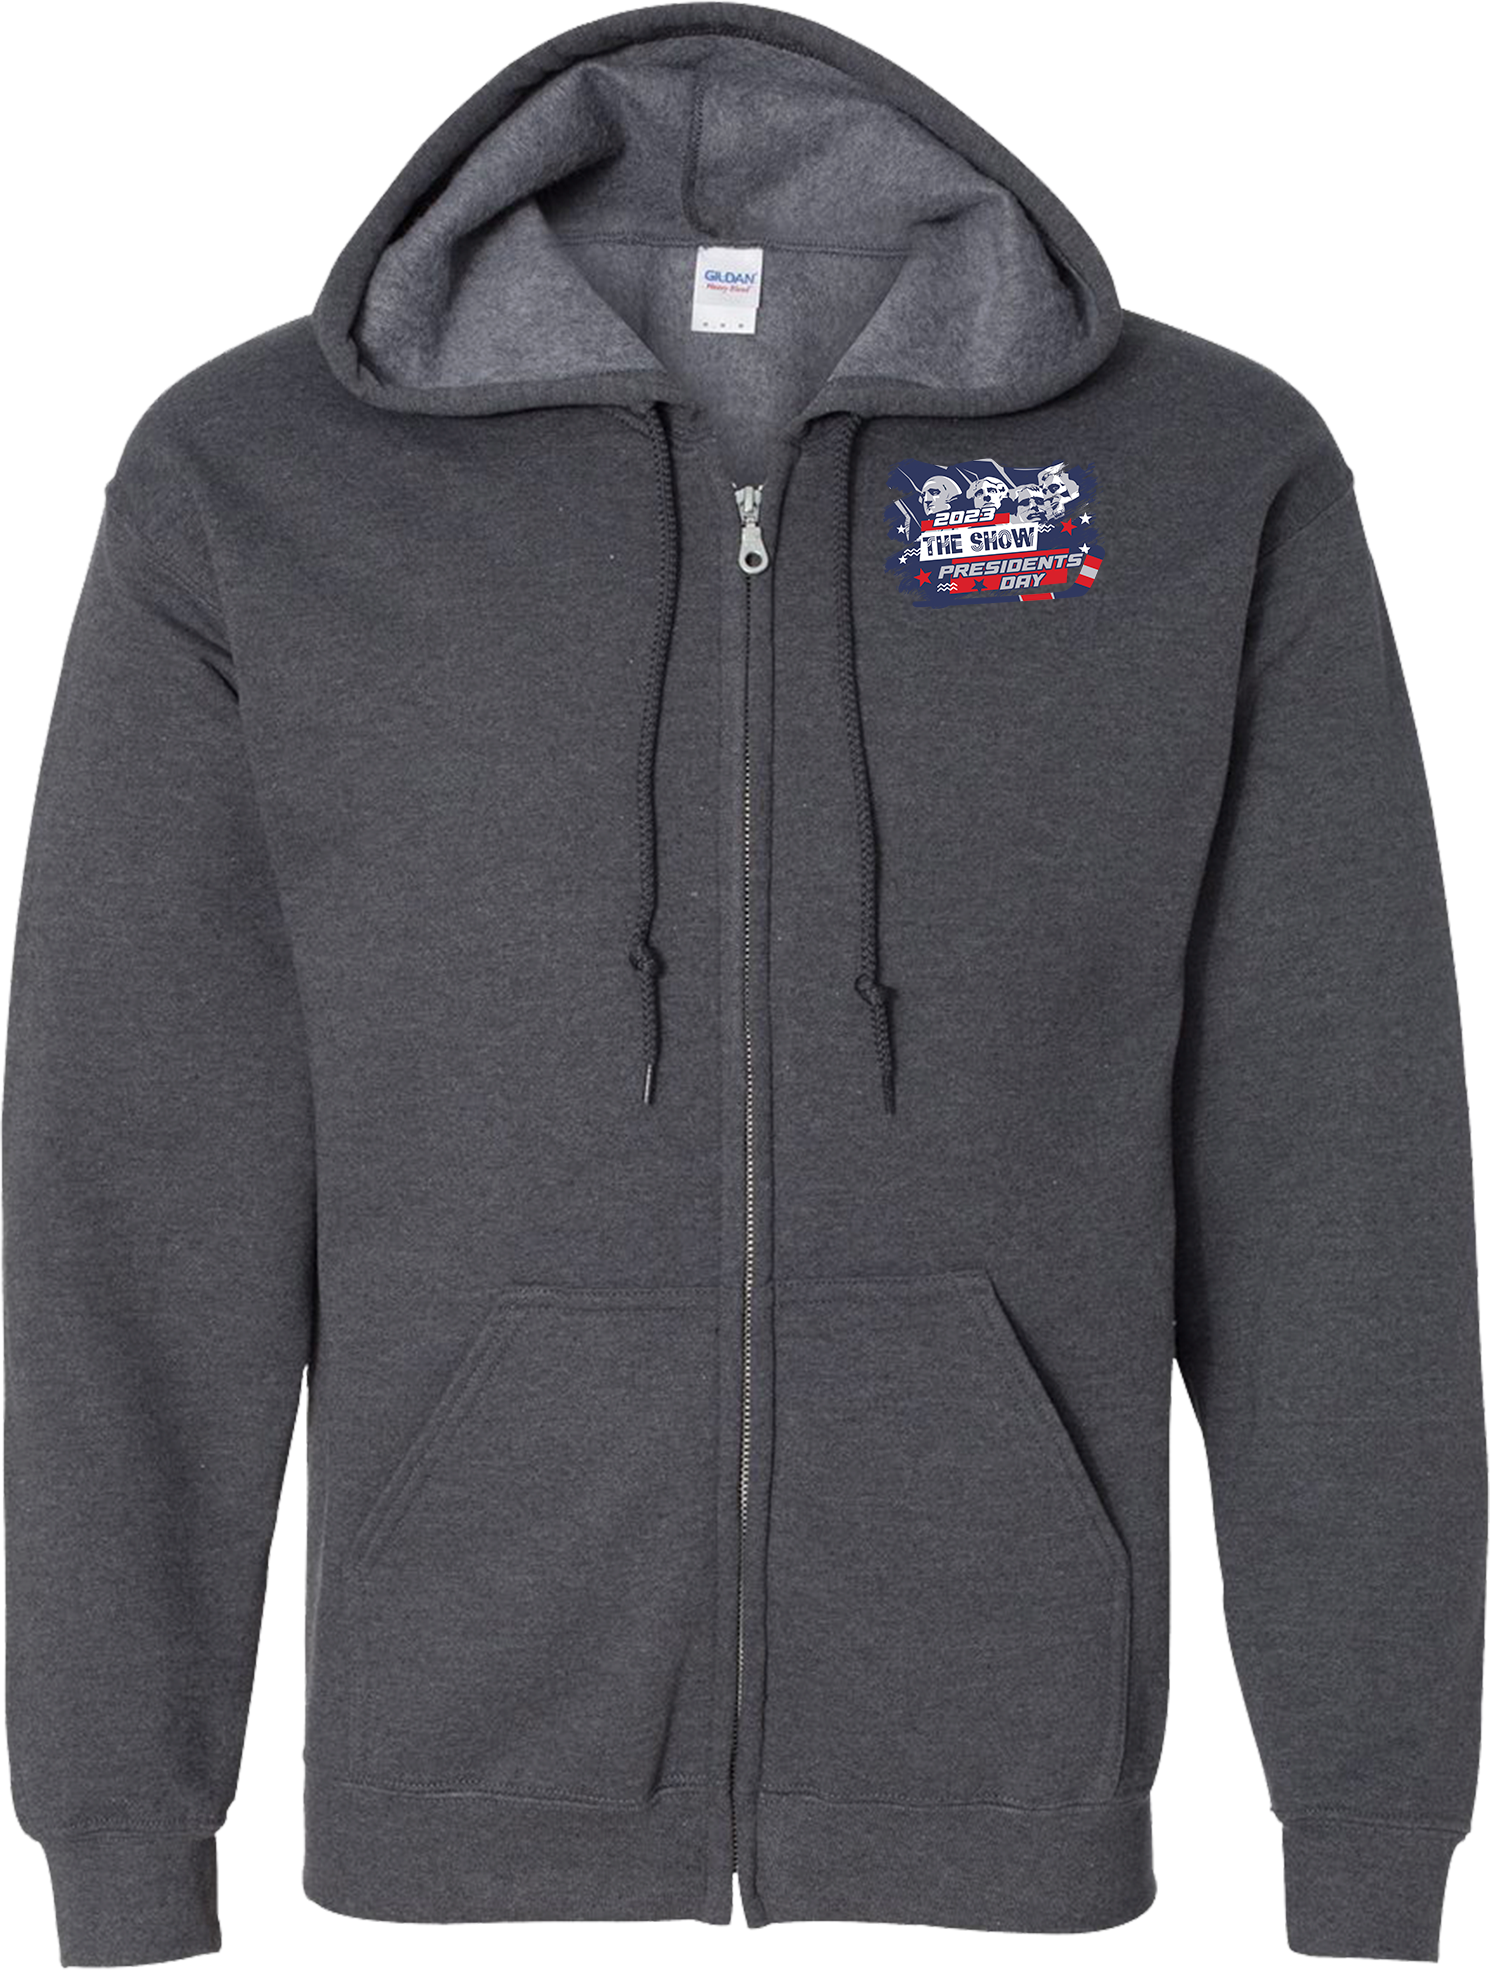 FULL ZIP HOODIES - 2023 The Show President's Day